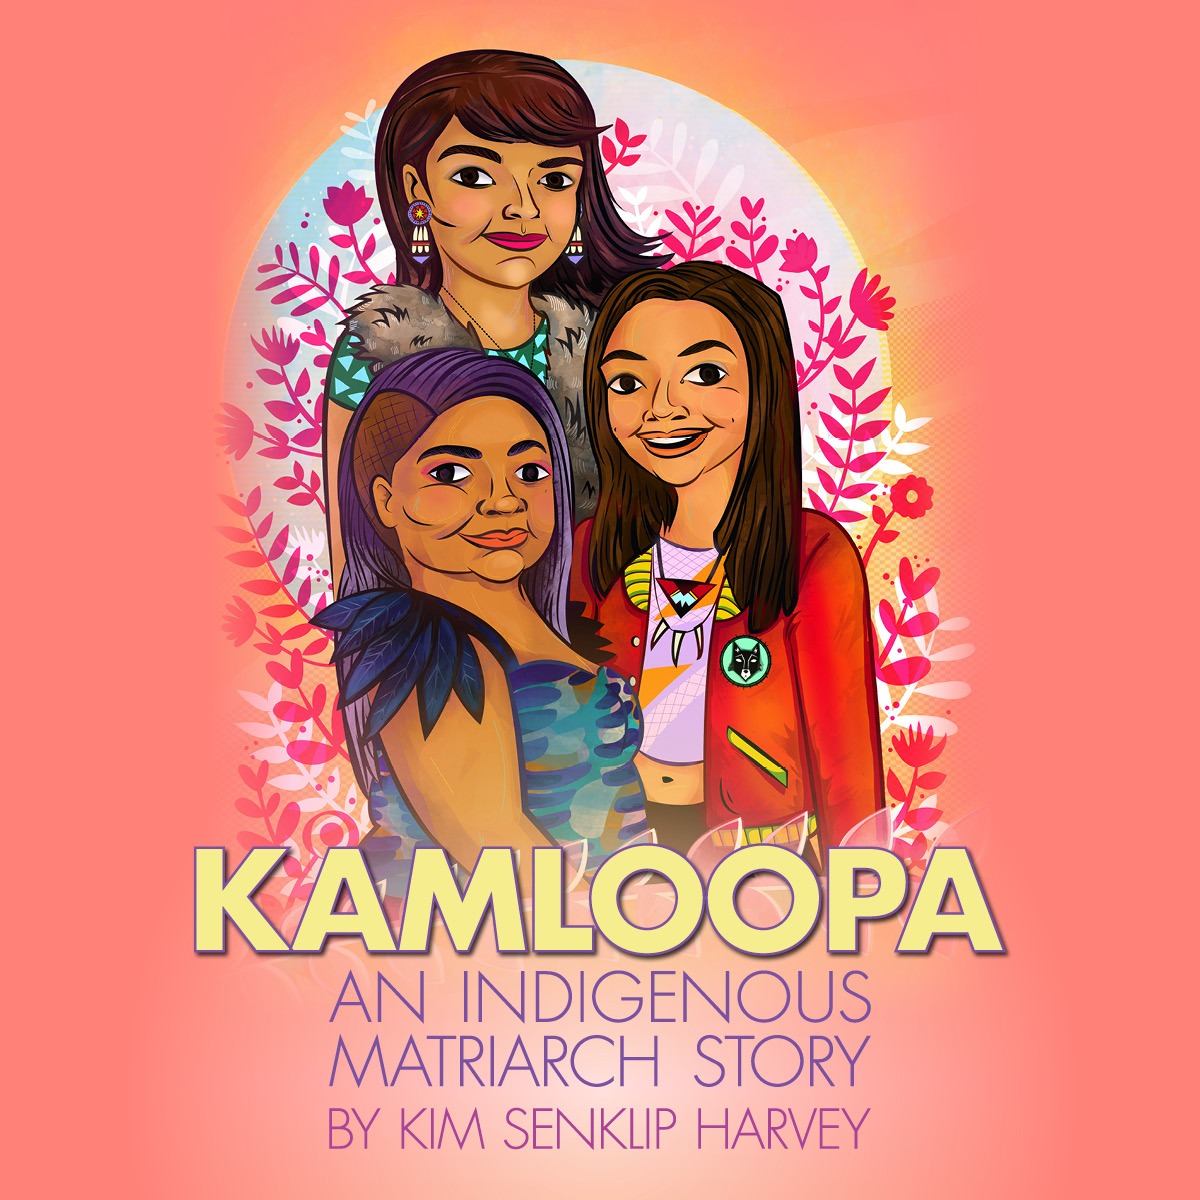 Artwork by Karlene Harvey for WAM's production of KAMLOOPA depicting three indigenous women on a peach colored background.